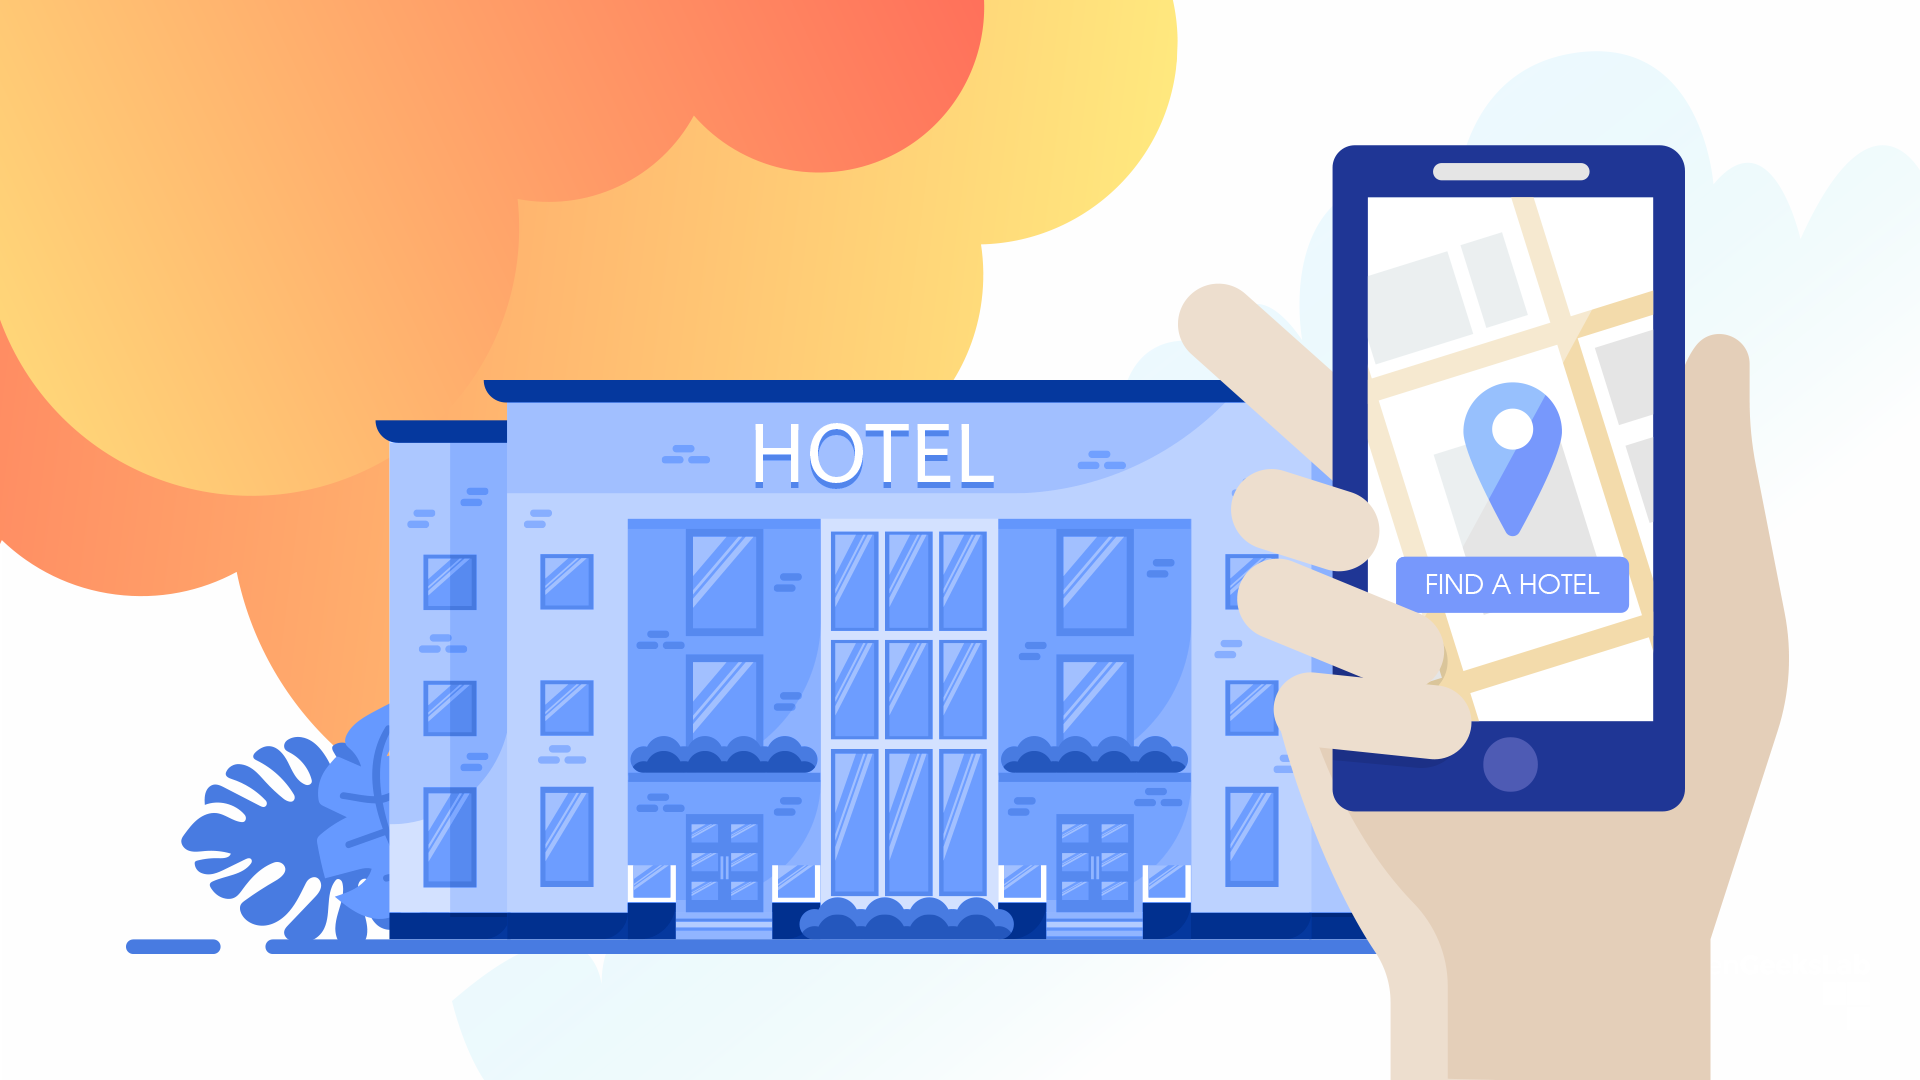 Key-Factors-While-Hotel-Booking-App-Planning